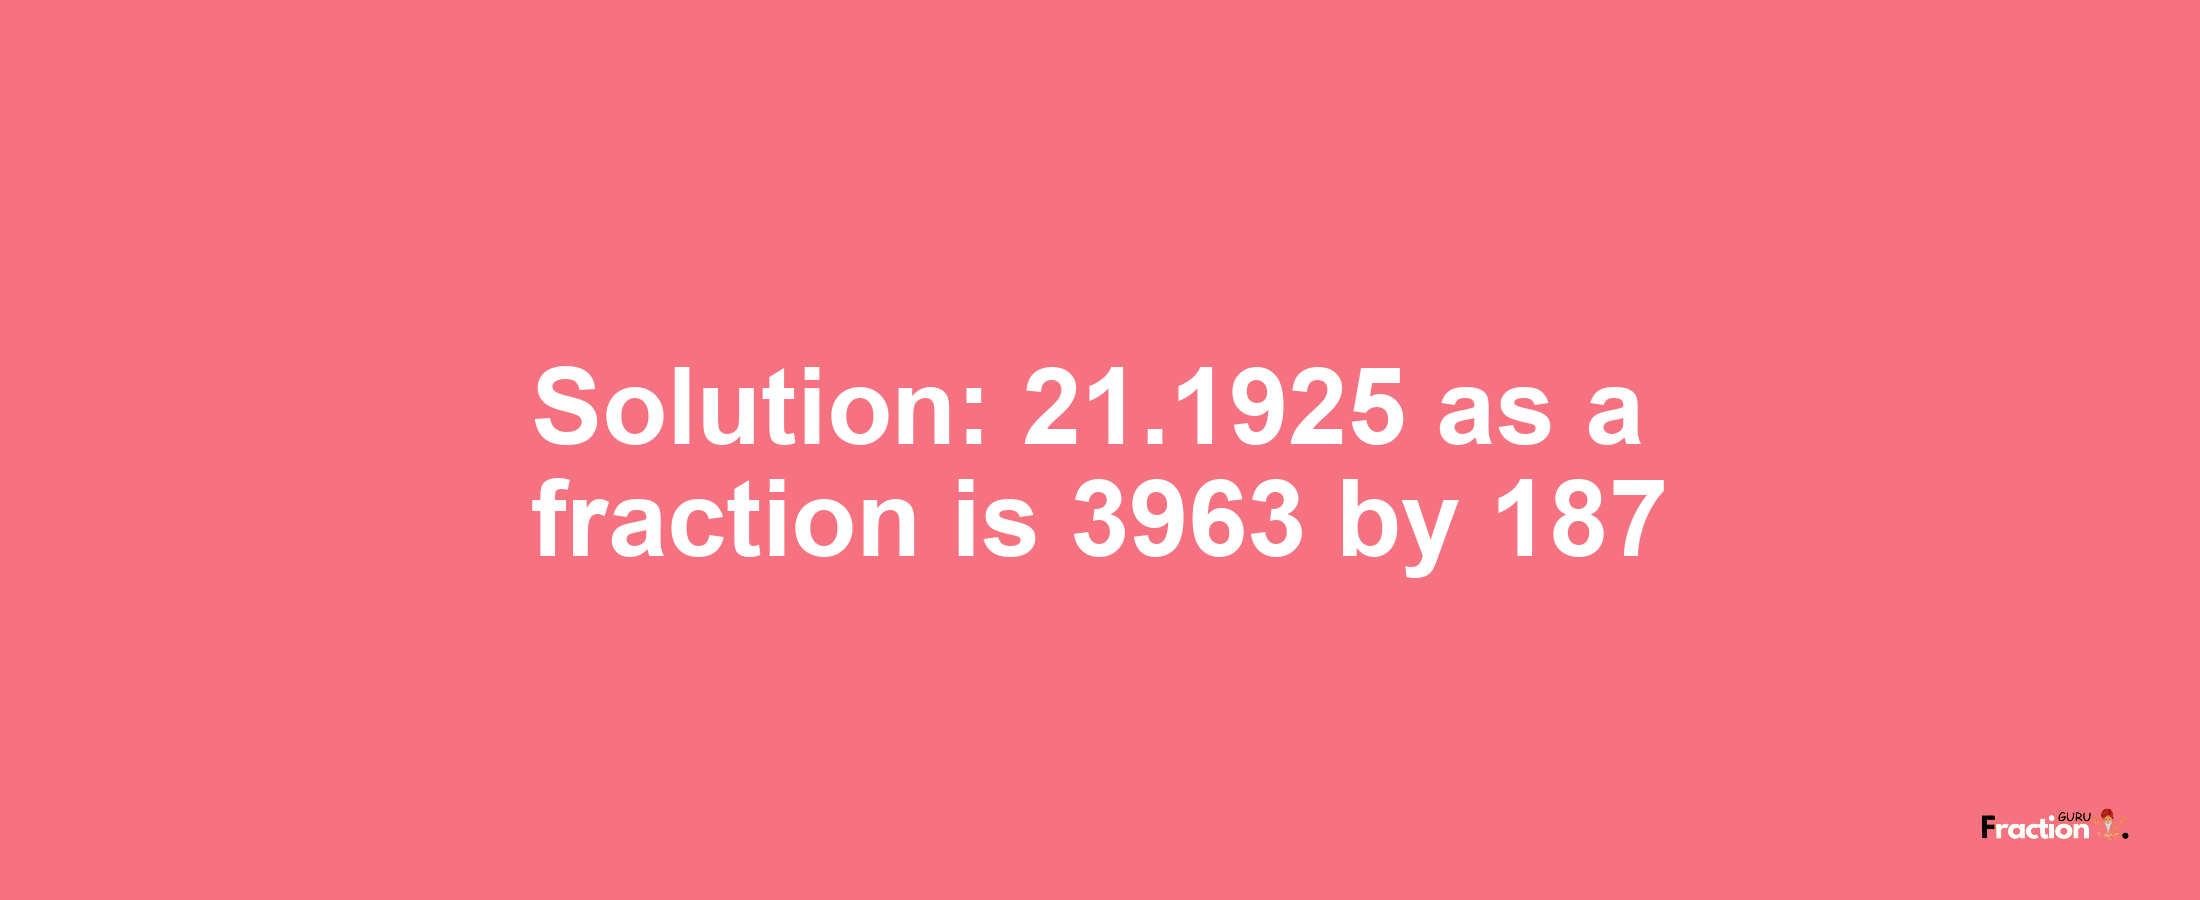 Solution:21.1925 as a fraction is 3963/187